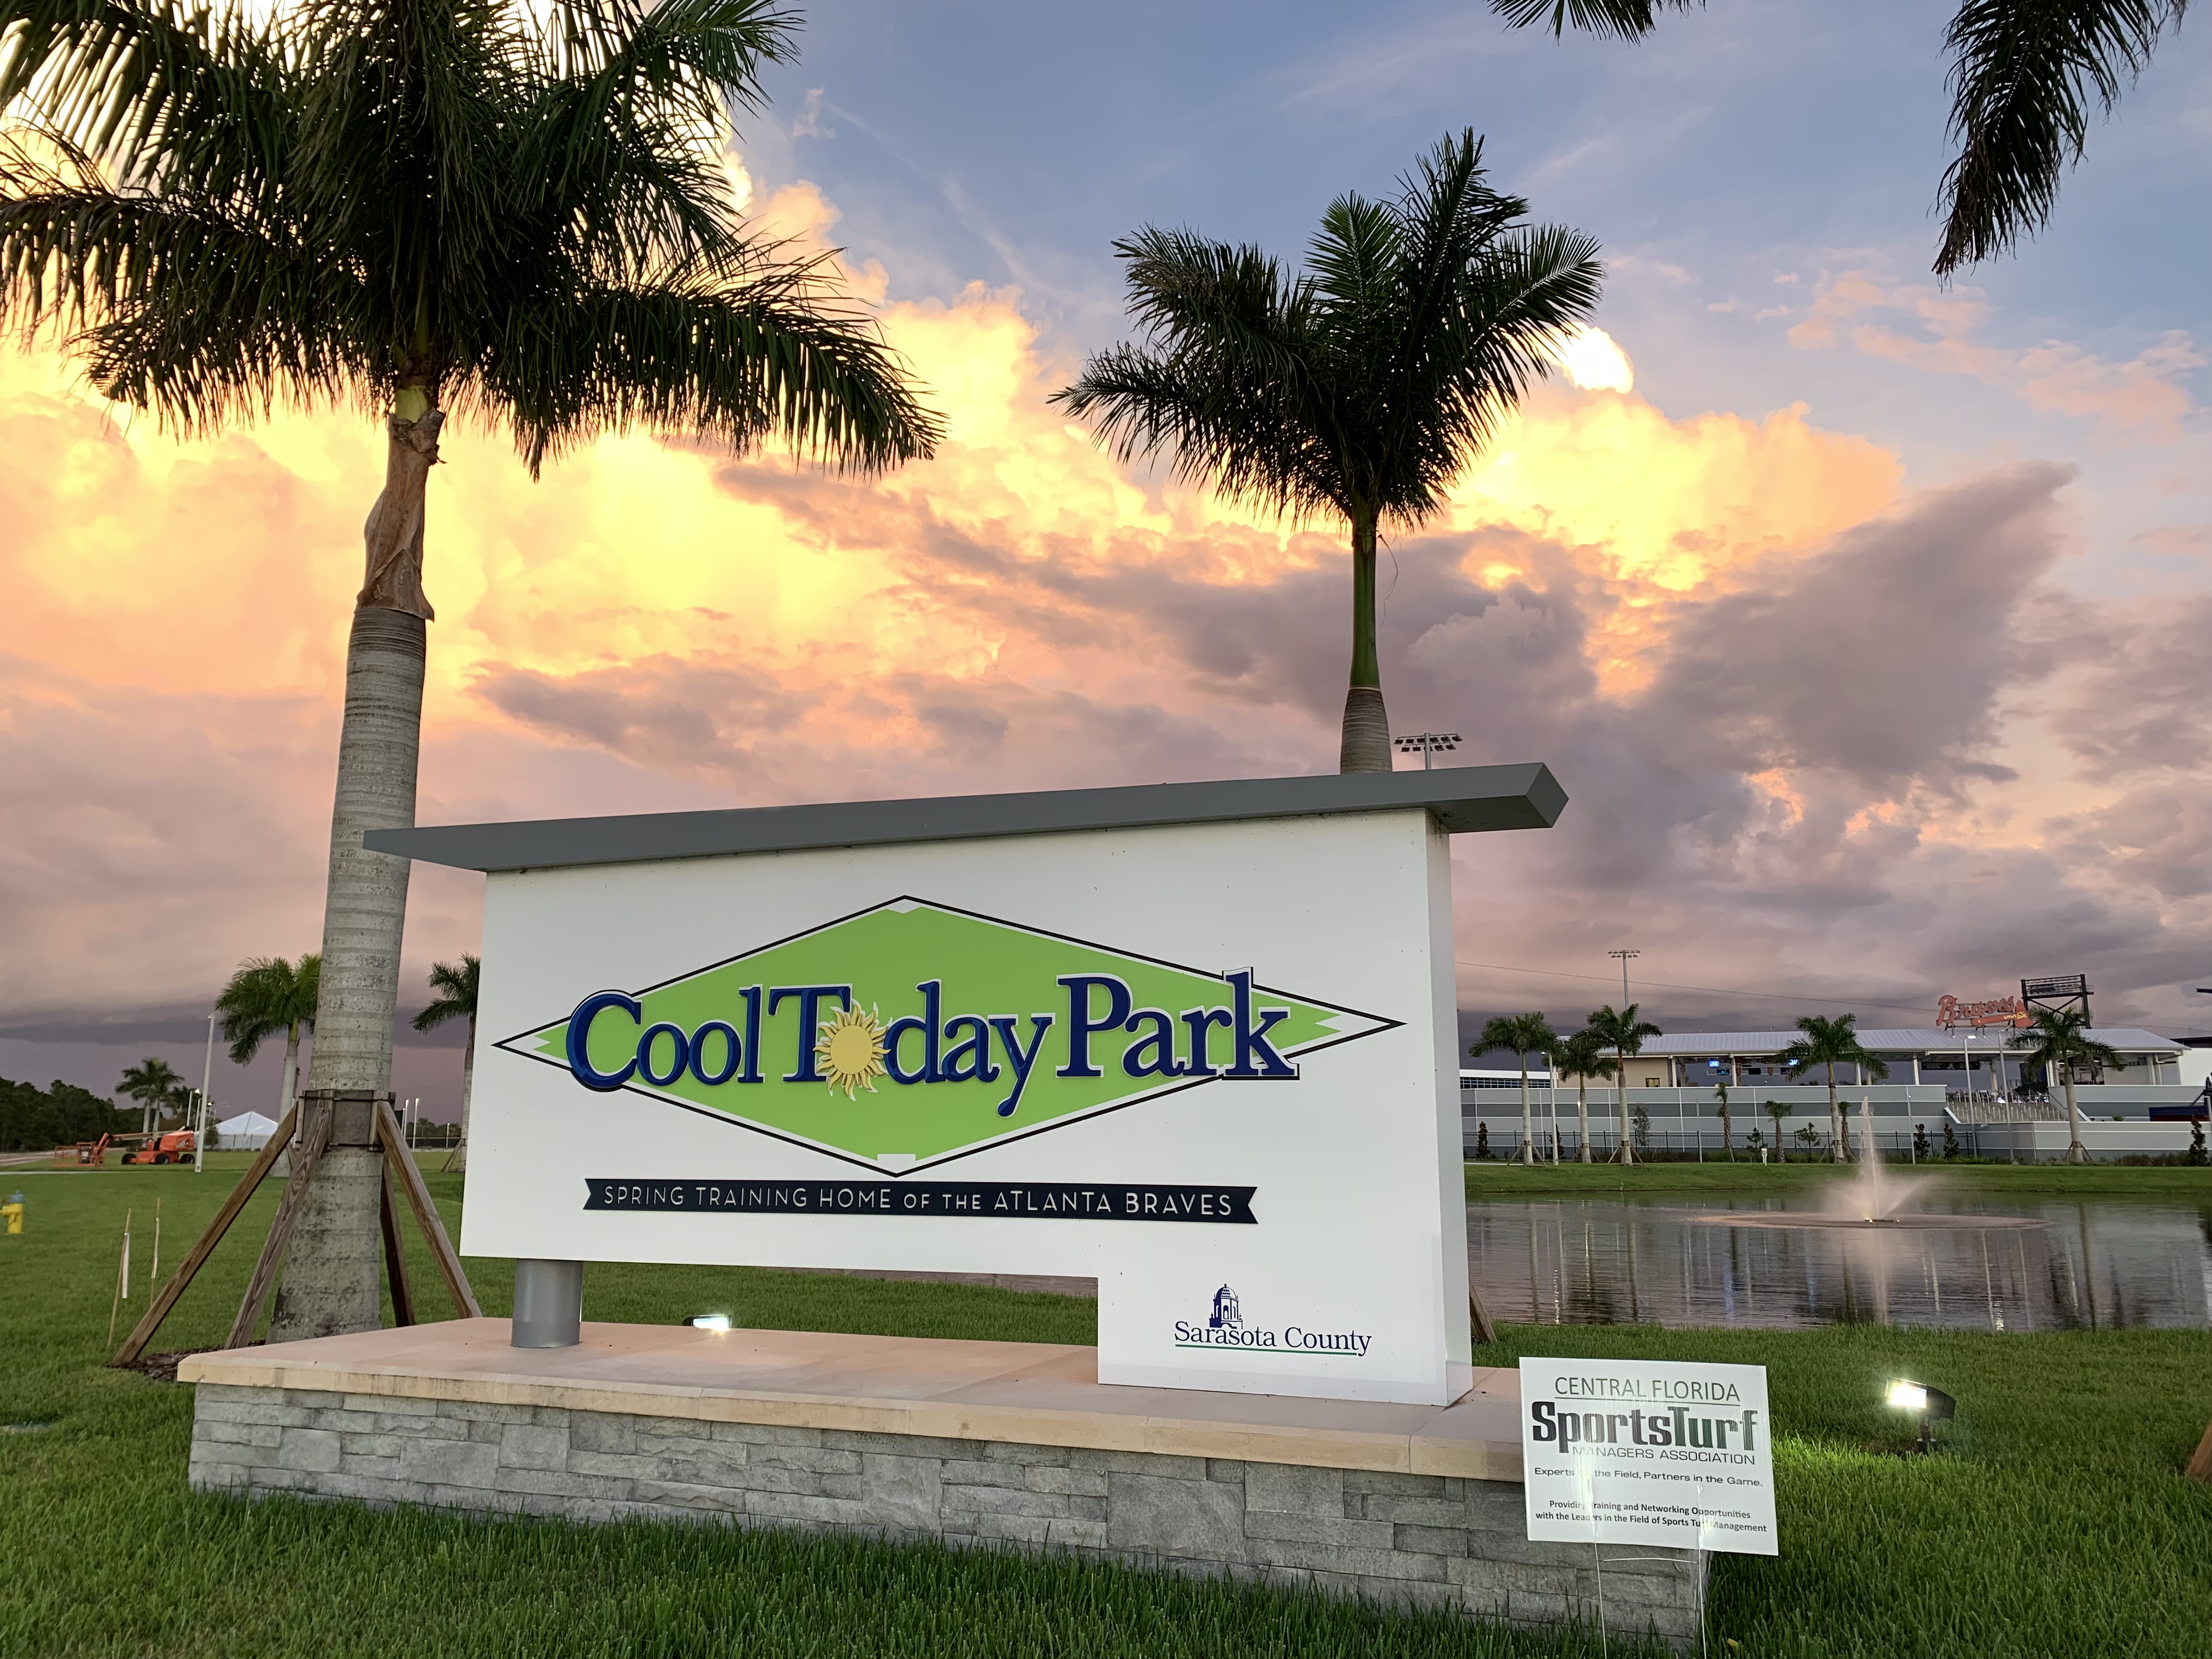 CoolToday Park on X: 𝗕𝗿𝗮𝘃𝗲𝘀 𝗮𝗿𝗲 𝗯𝗮𝗰𝗸 𝗵𝗼𝗺𝗲 𝗮𝘁